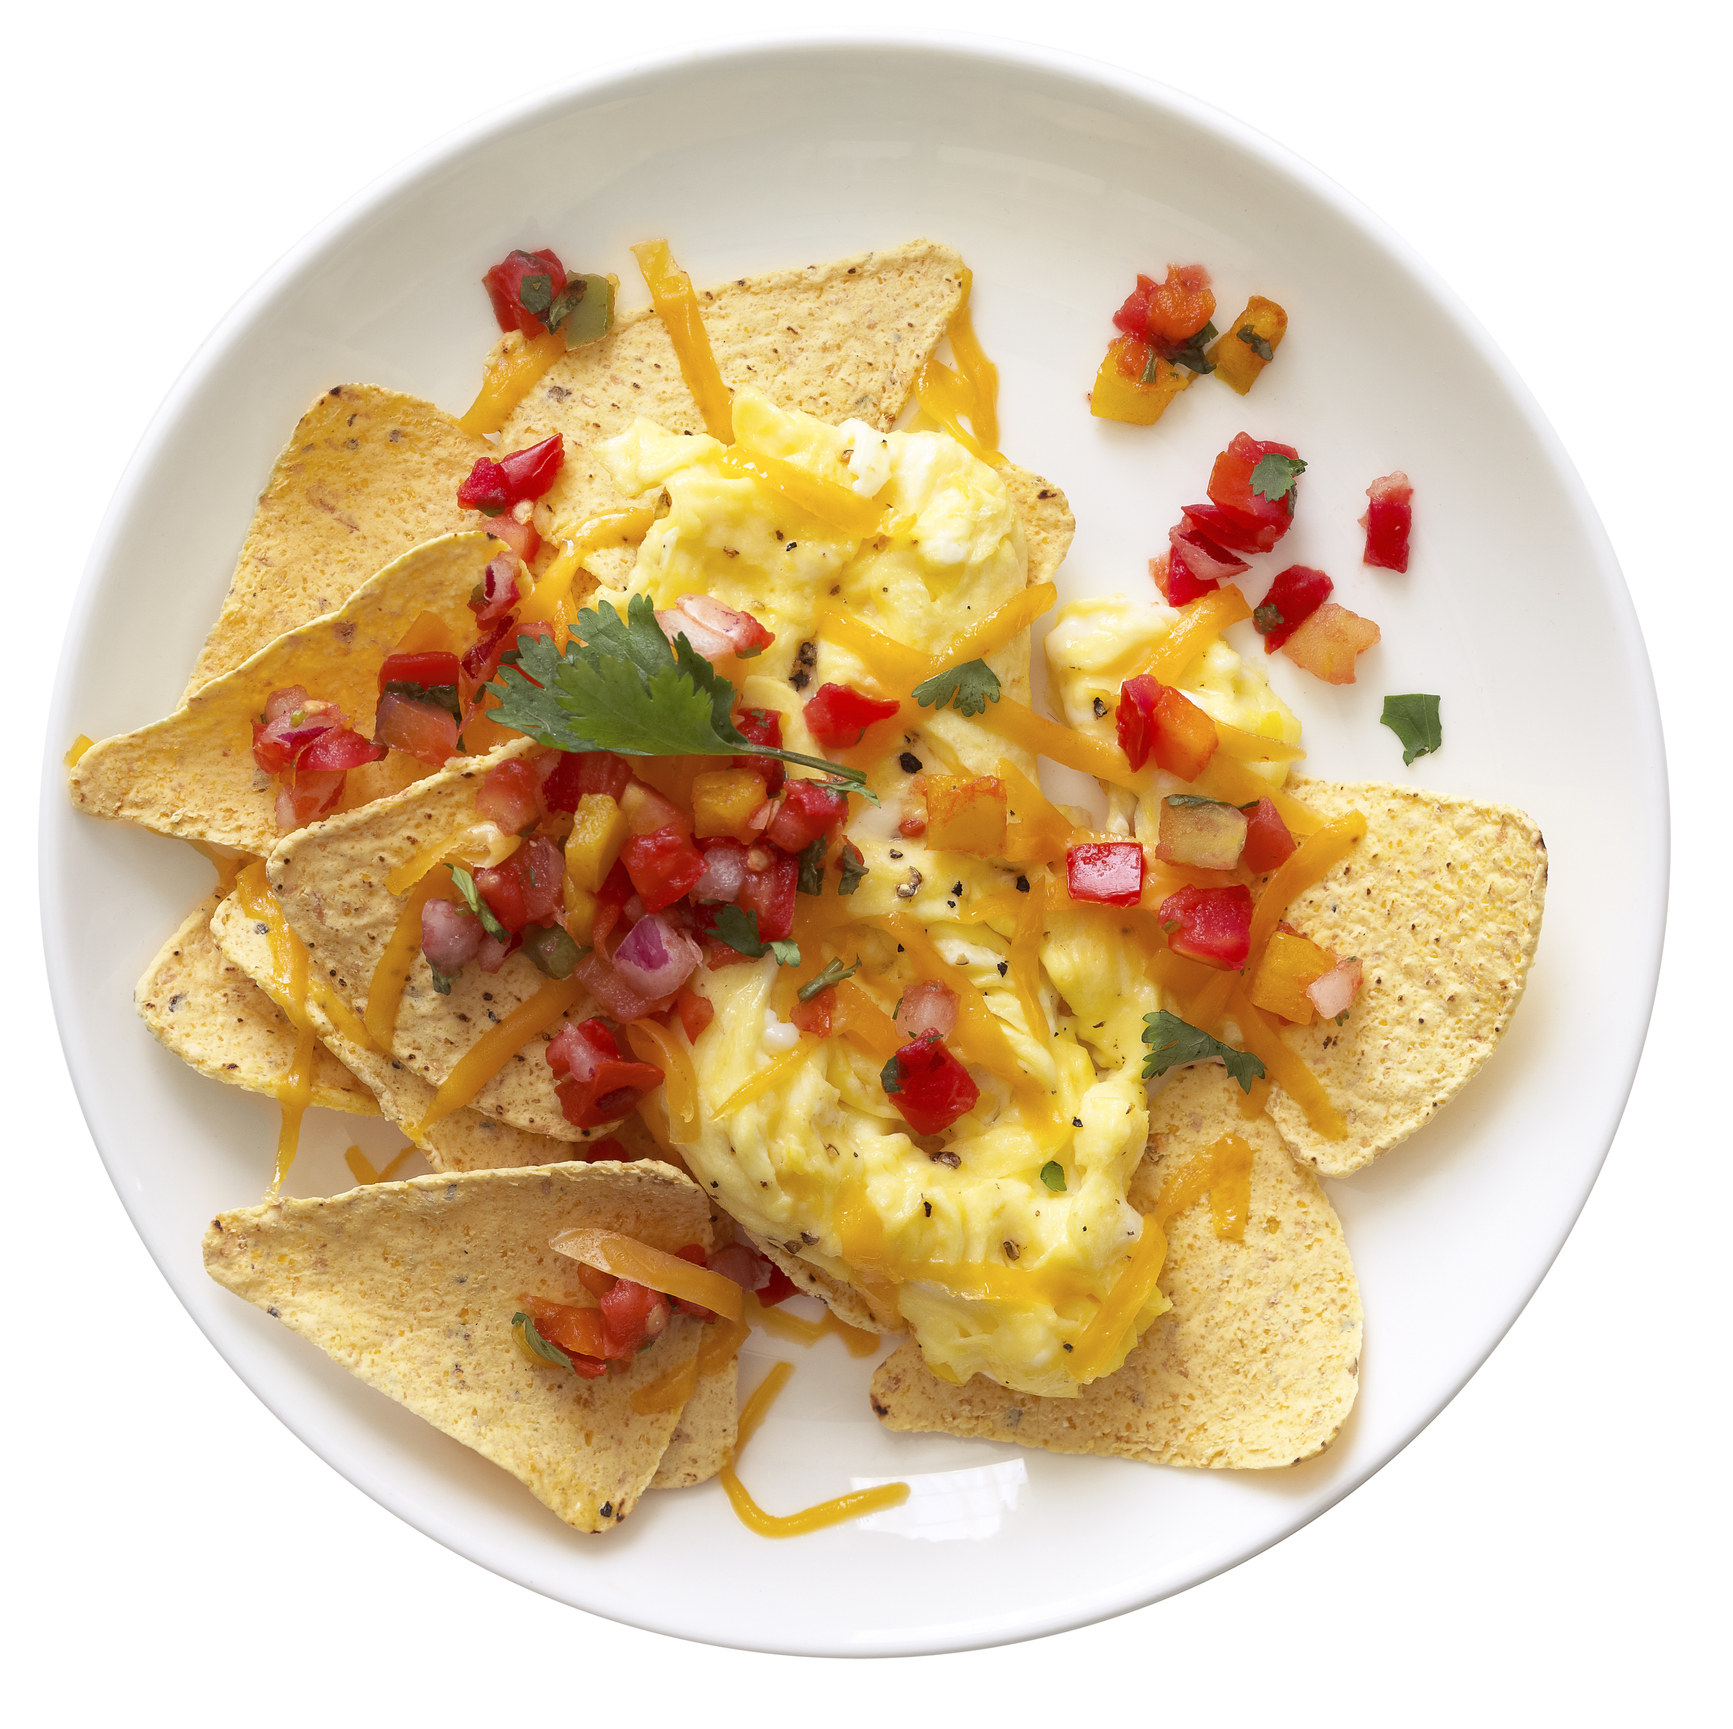 Scrambled eggs on tortilla chips with shredded cheese and pico de gallo.